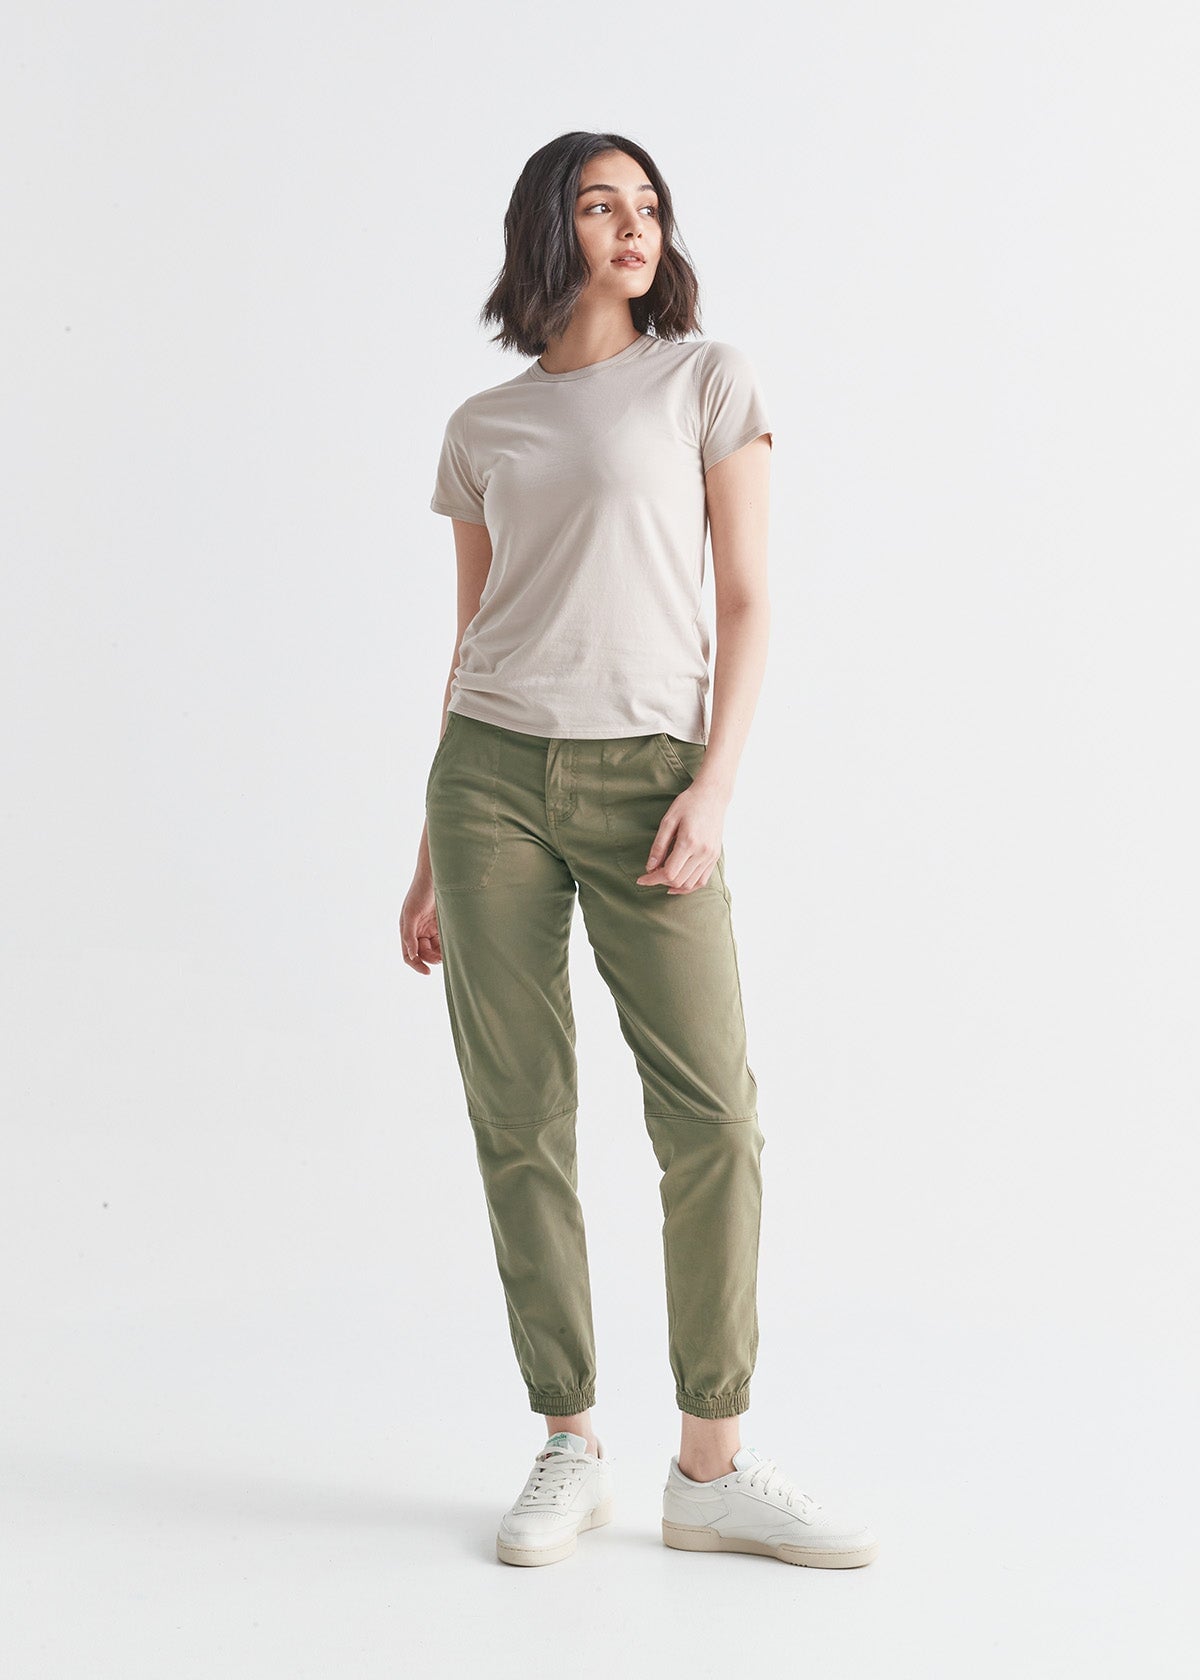 Whole Earth Provision Co.  DUER DU/ER Women's Live Free High Rise Joggers